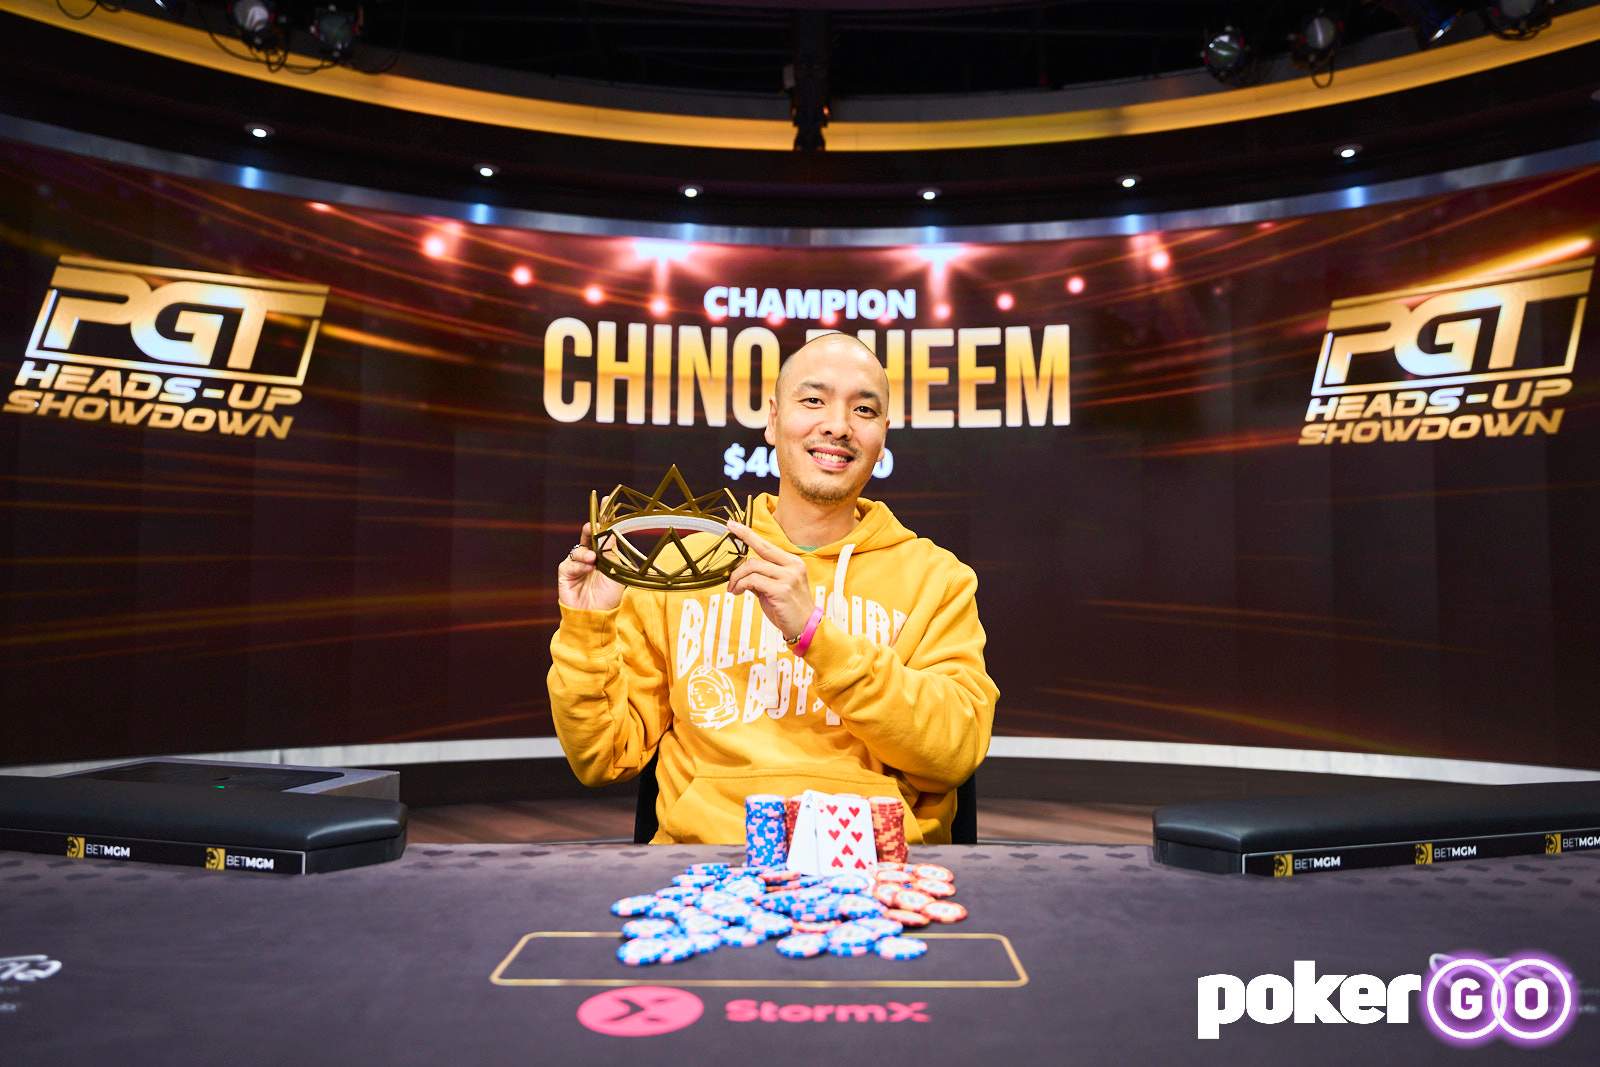 Chino Rheem Wins First-Ever PGT Heads-Up Showdown for $400,000